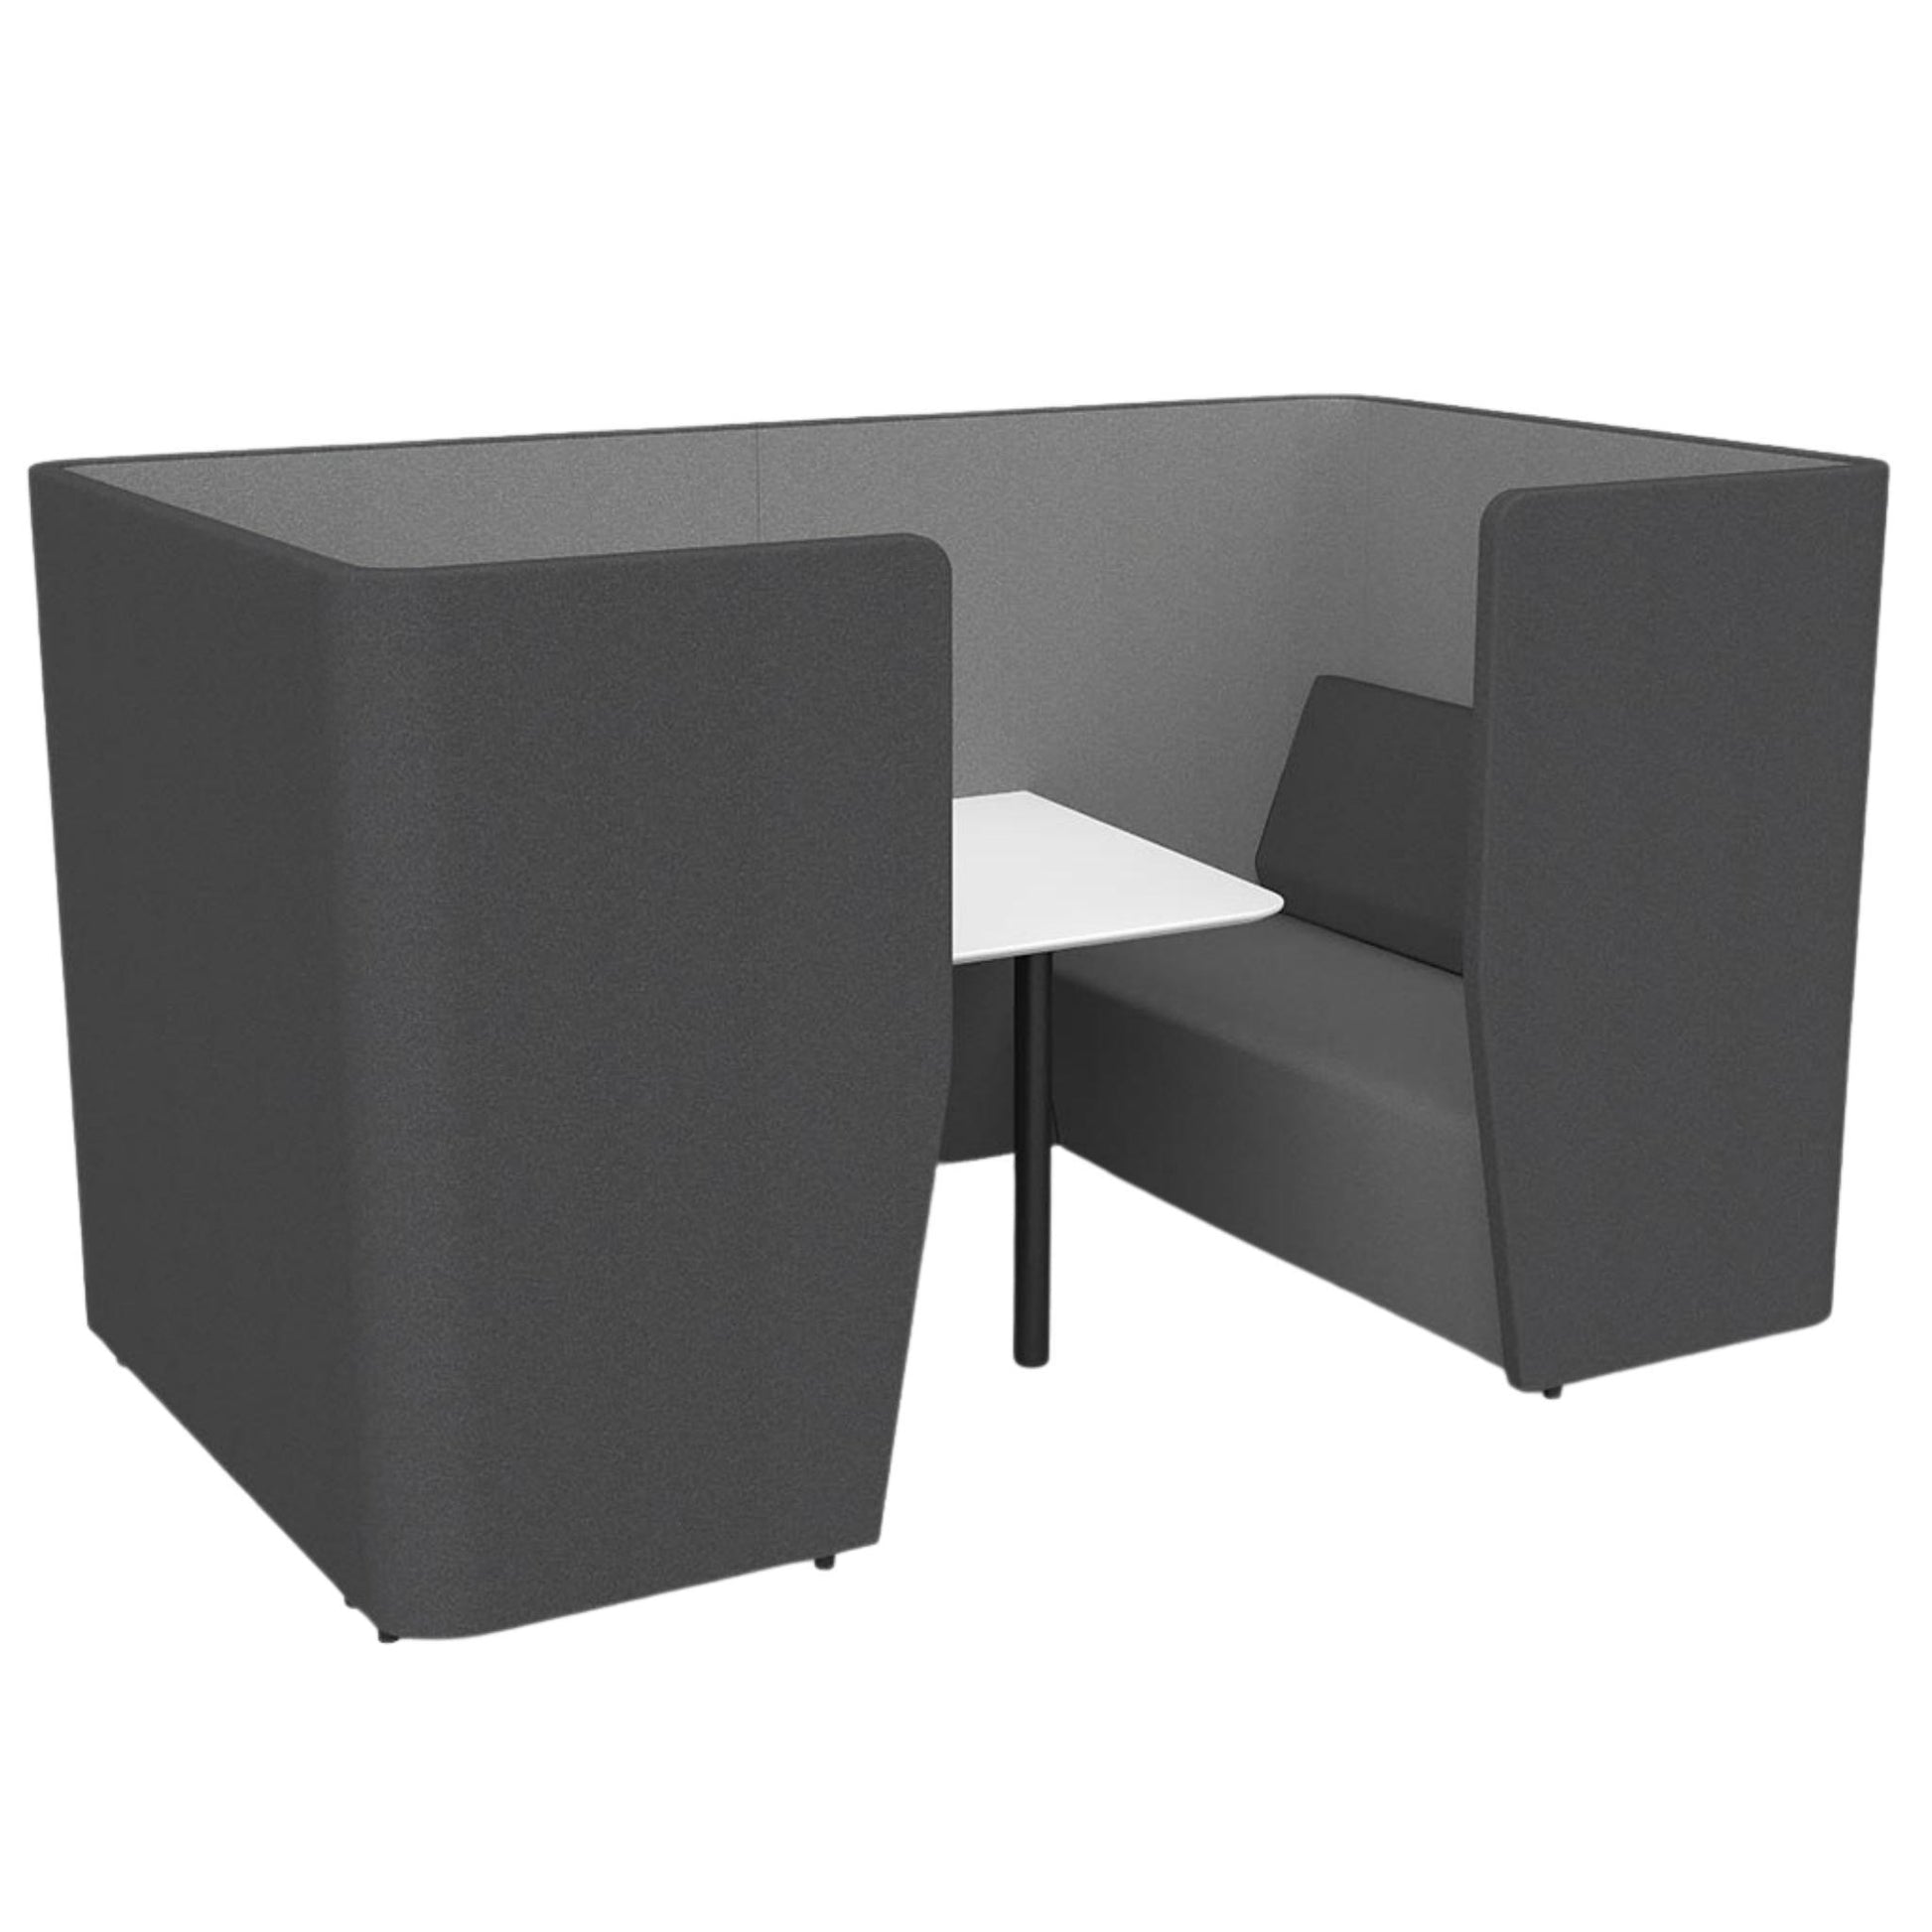 Motion Meeting 4 Seater Booth - Office Furniture Company 